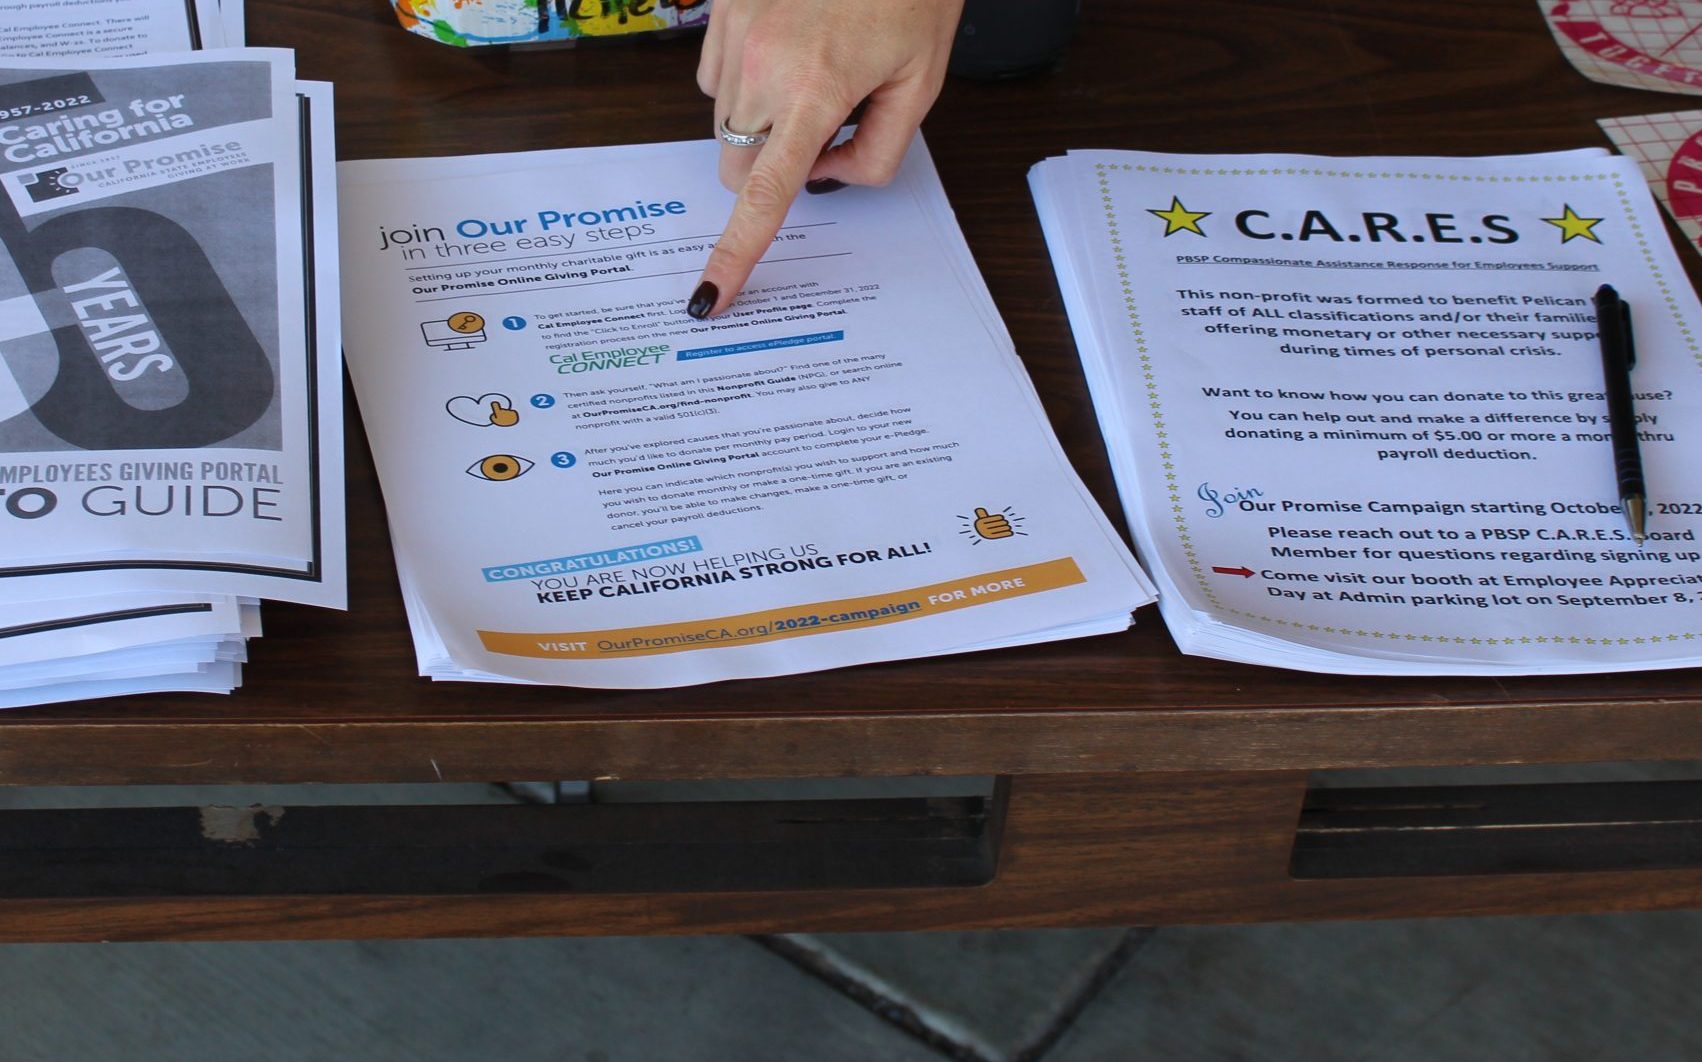 Pelican Bay prison CARES and Our Promise literature on a table.